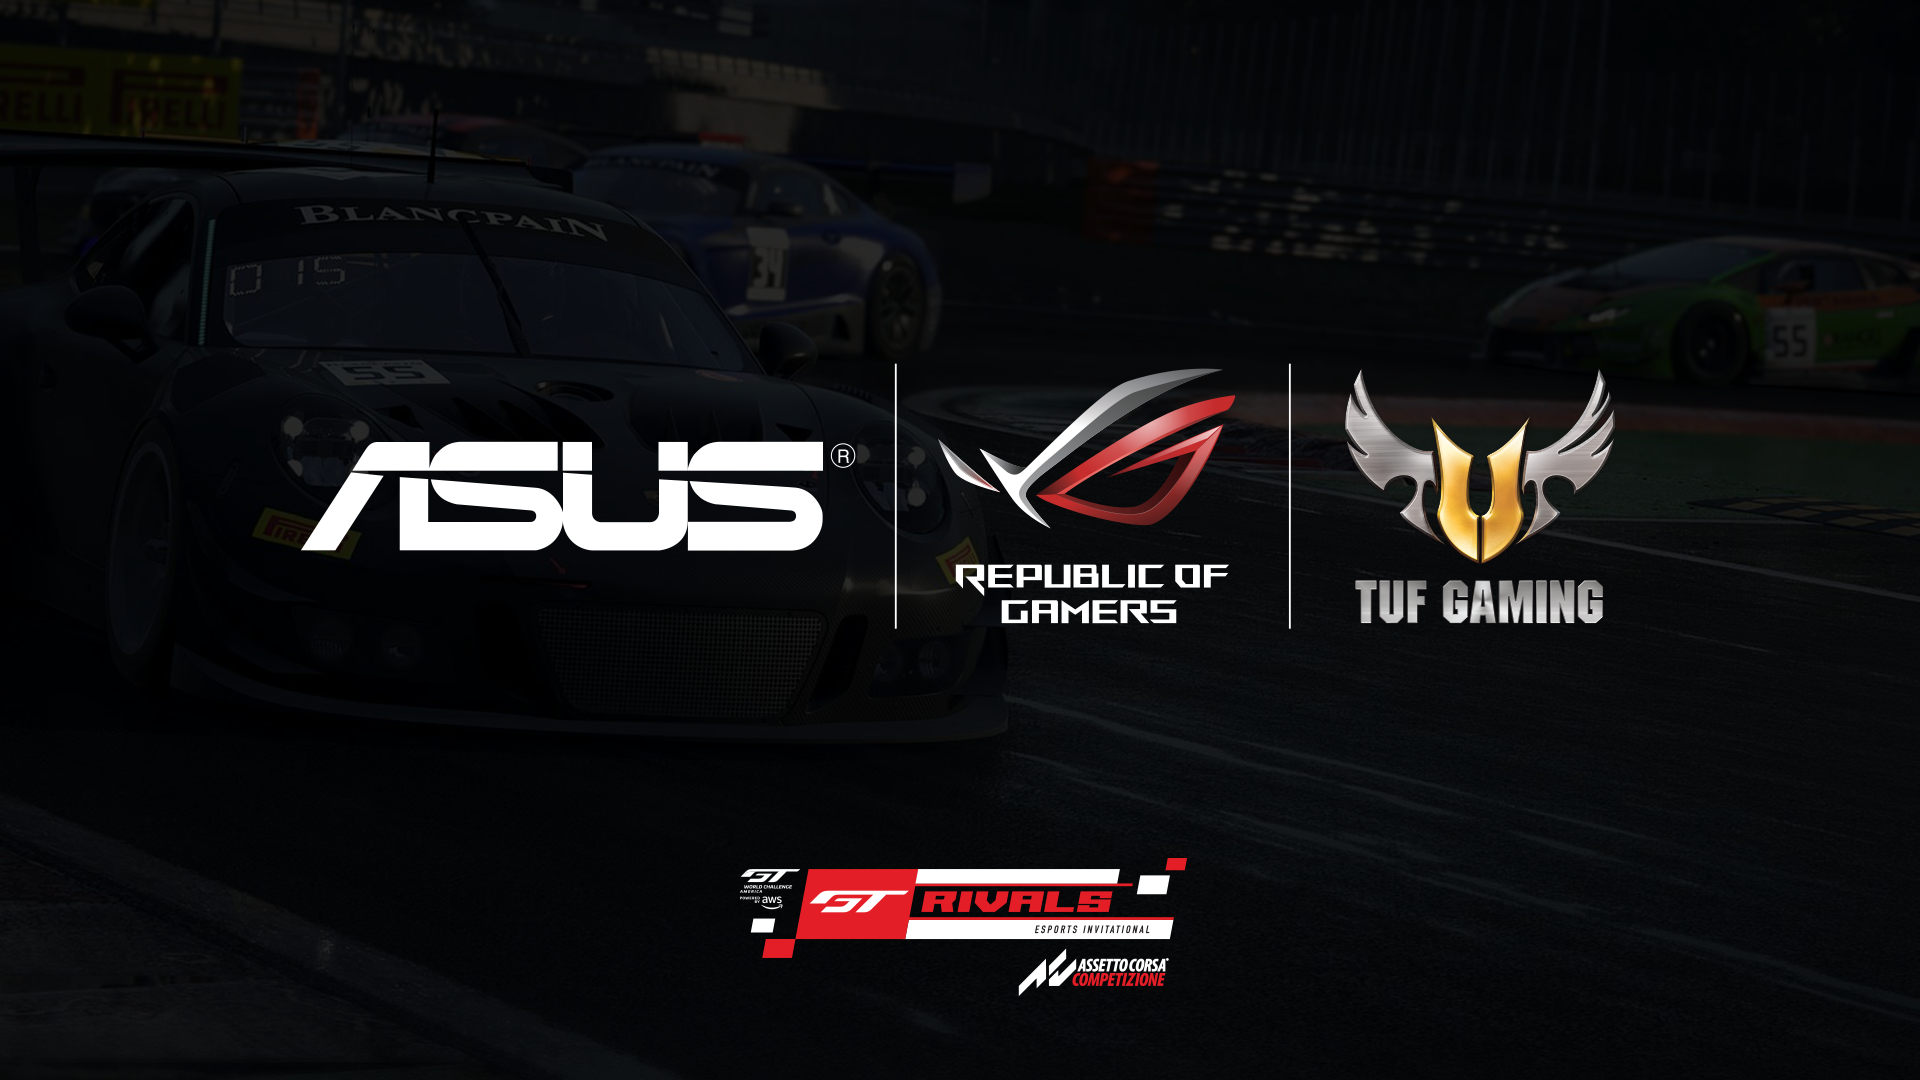 Featured image of post Full Hd Wallpaper Tuf Gaming : Download asus tuf gaming обои for desktop or mobile device.